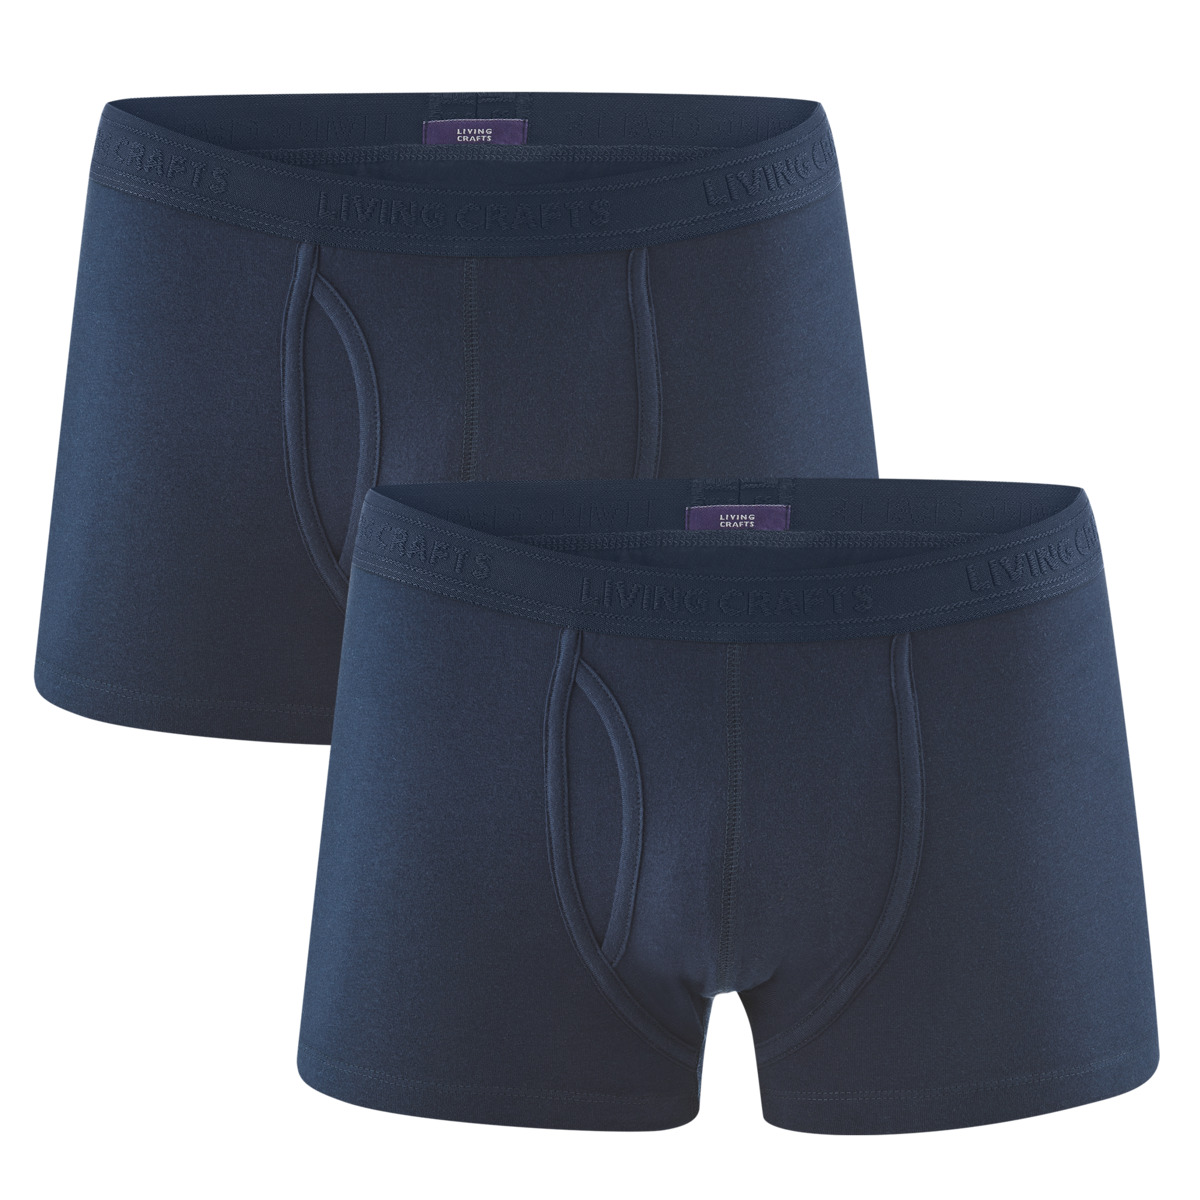 Blue Pants, pack of 2, APOLLO